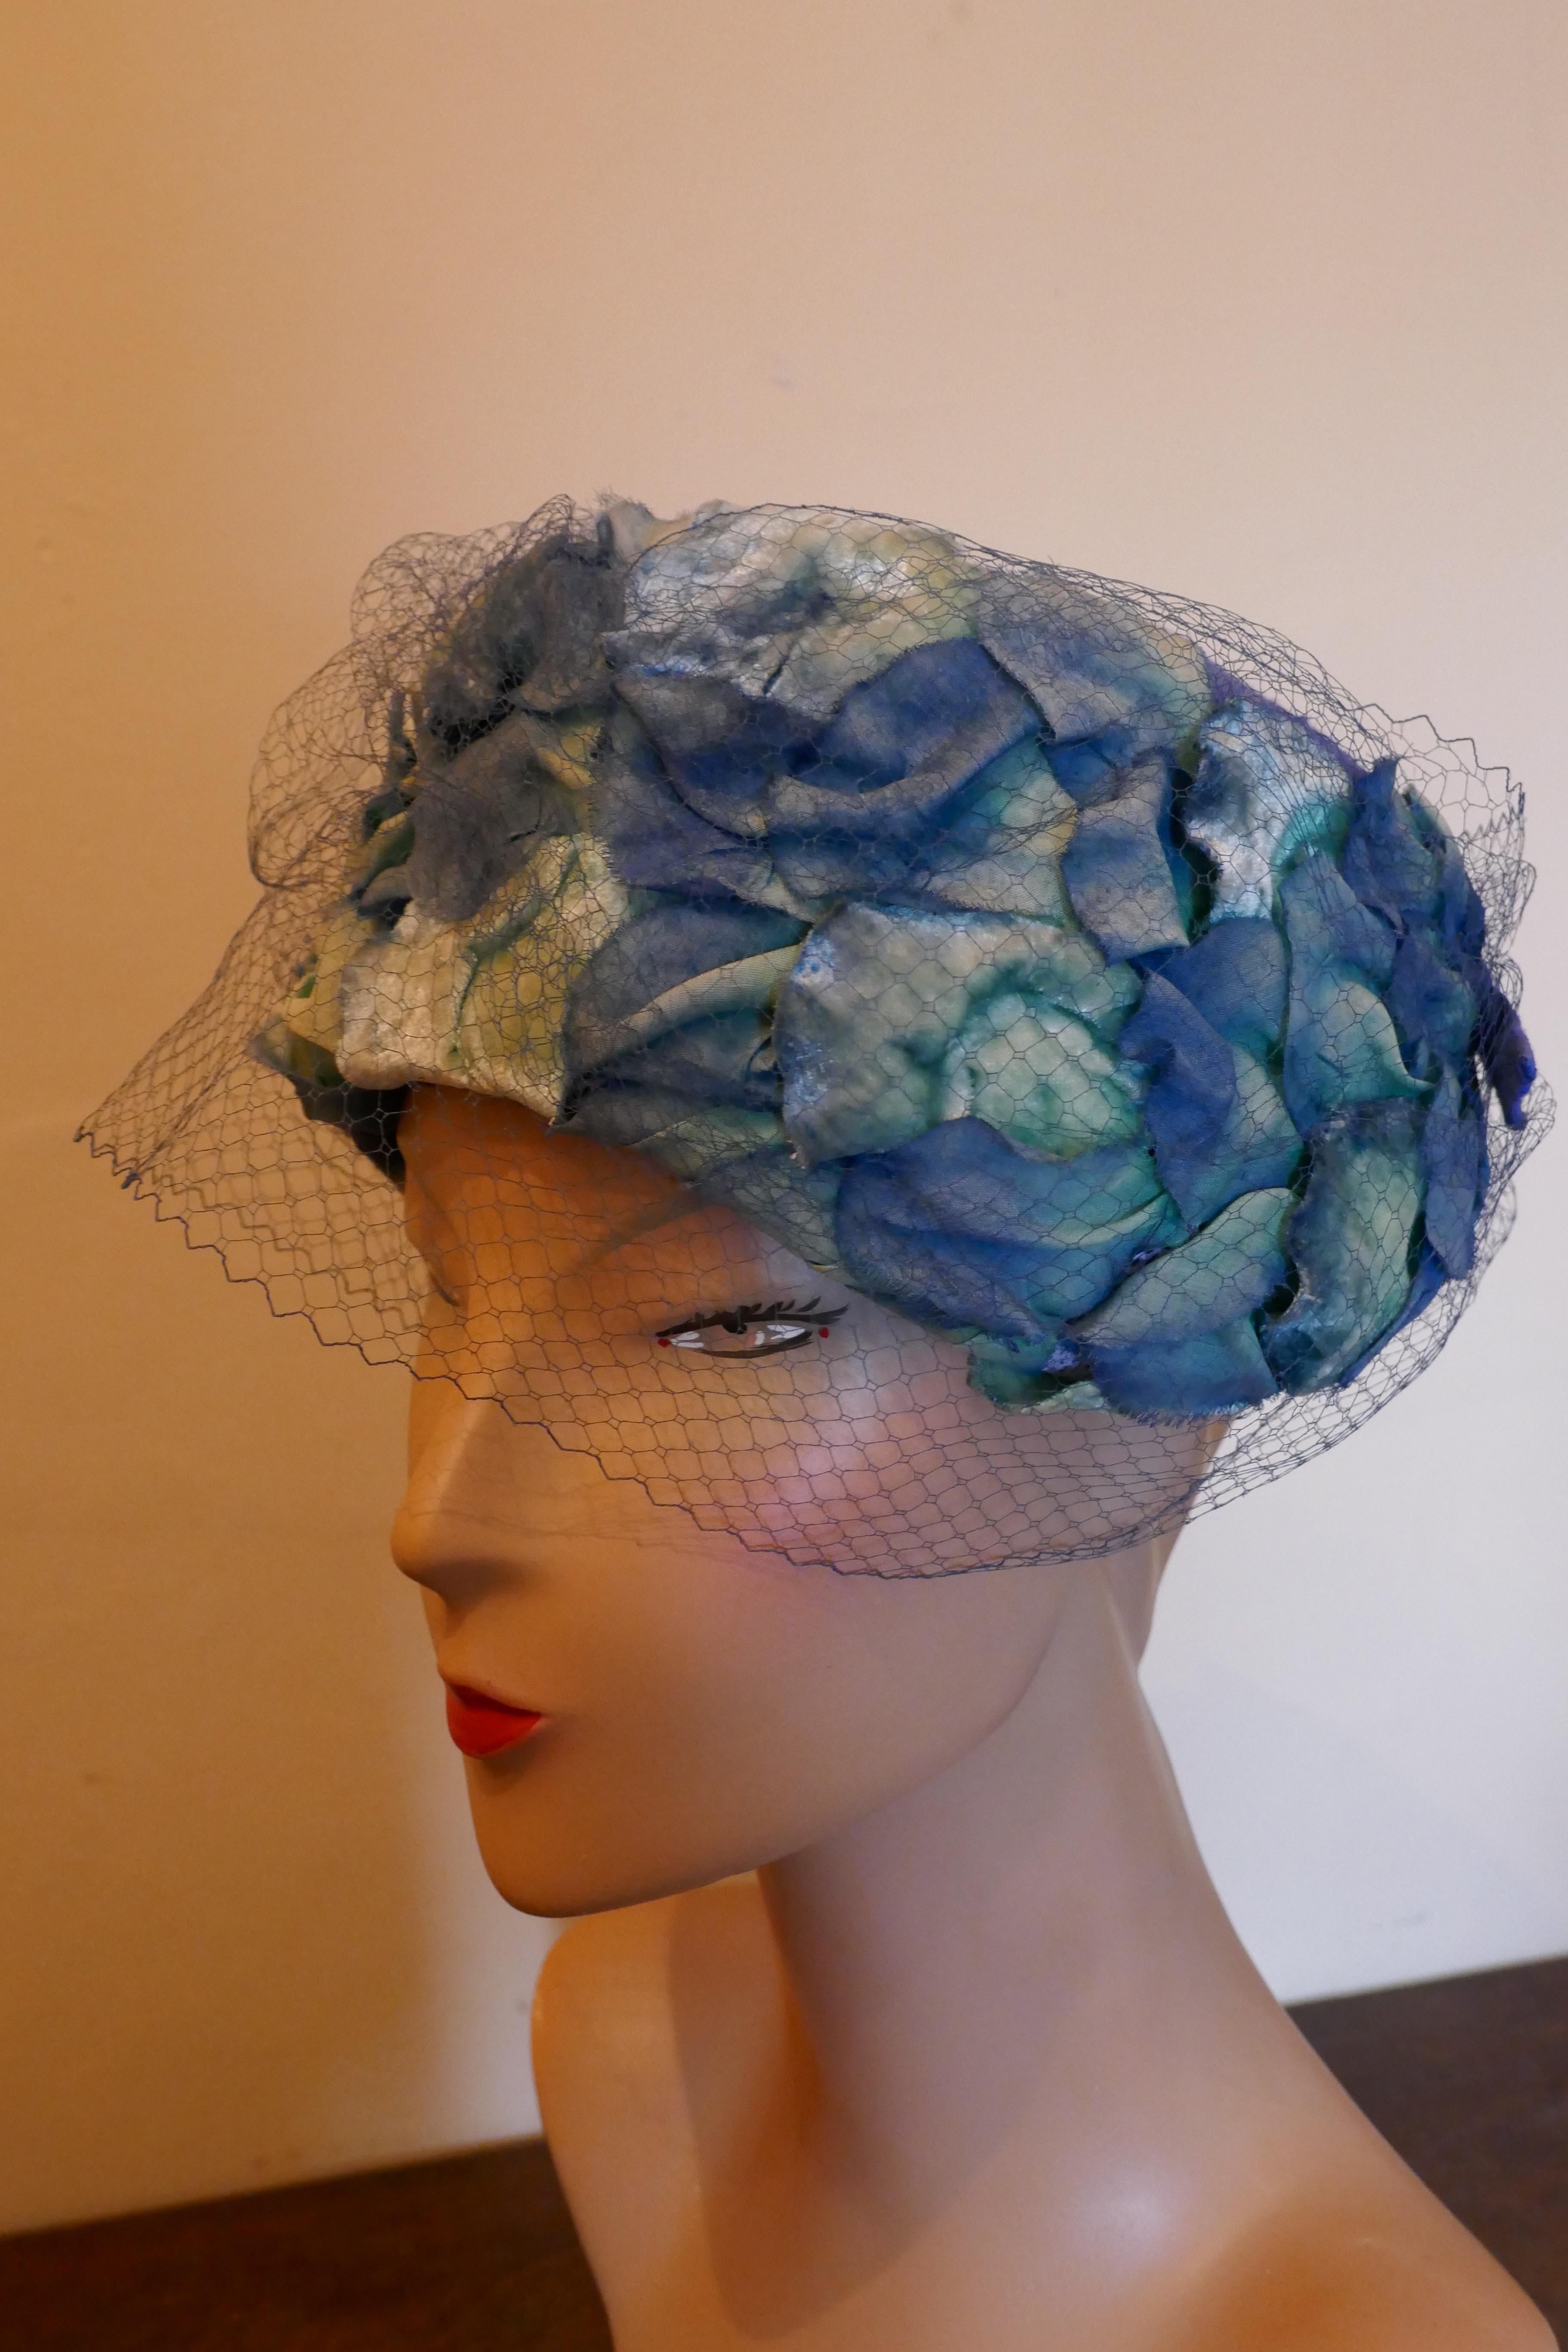 Original 1950s Blue Pill Box Hat, Decorated with Roses and Veil, by Connor

Stunning classic pill box hat, in linen decorated with rose petals, trimmed with a small veil and designed by Connor
One for the Summer Garden Party
The Hat is in good